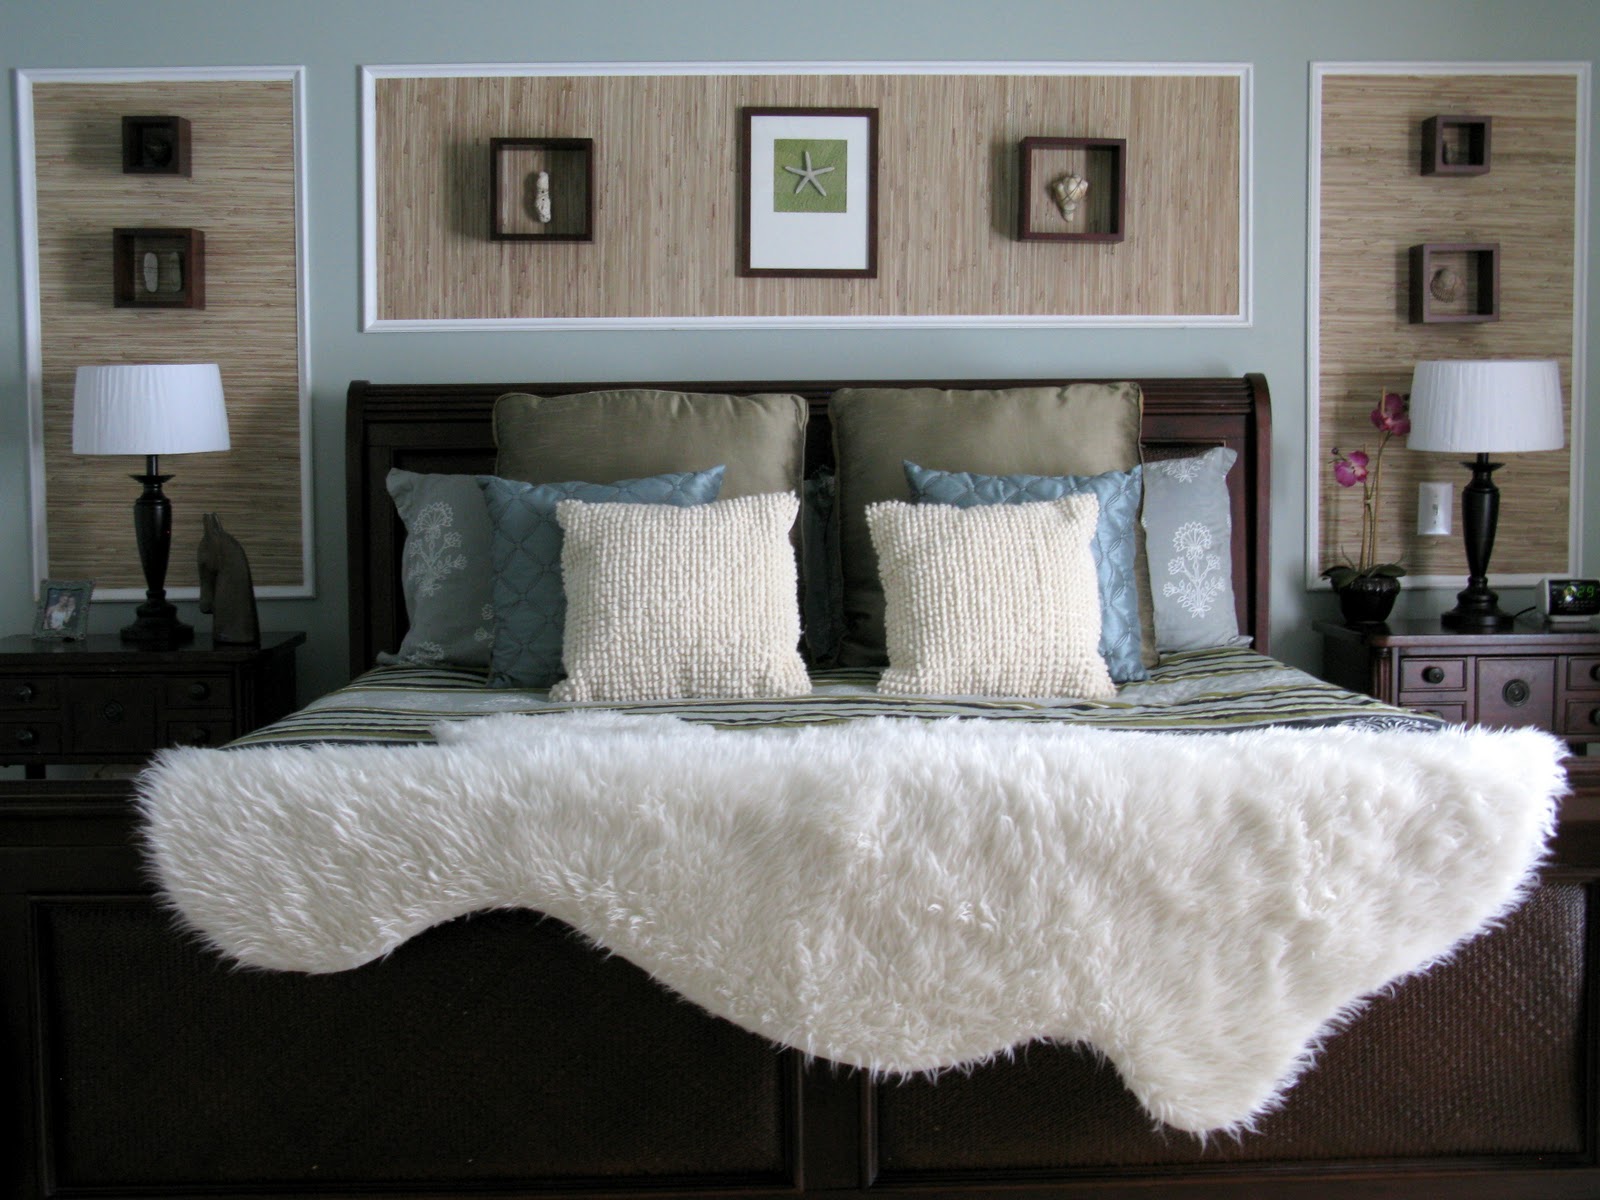 Free Download Voted One Of The Top Bedrooms By Houzz Readers